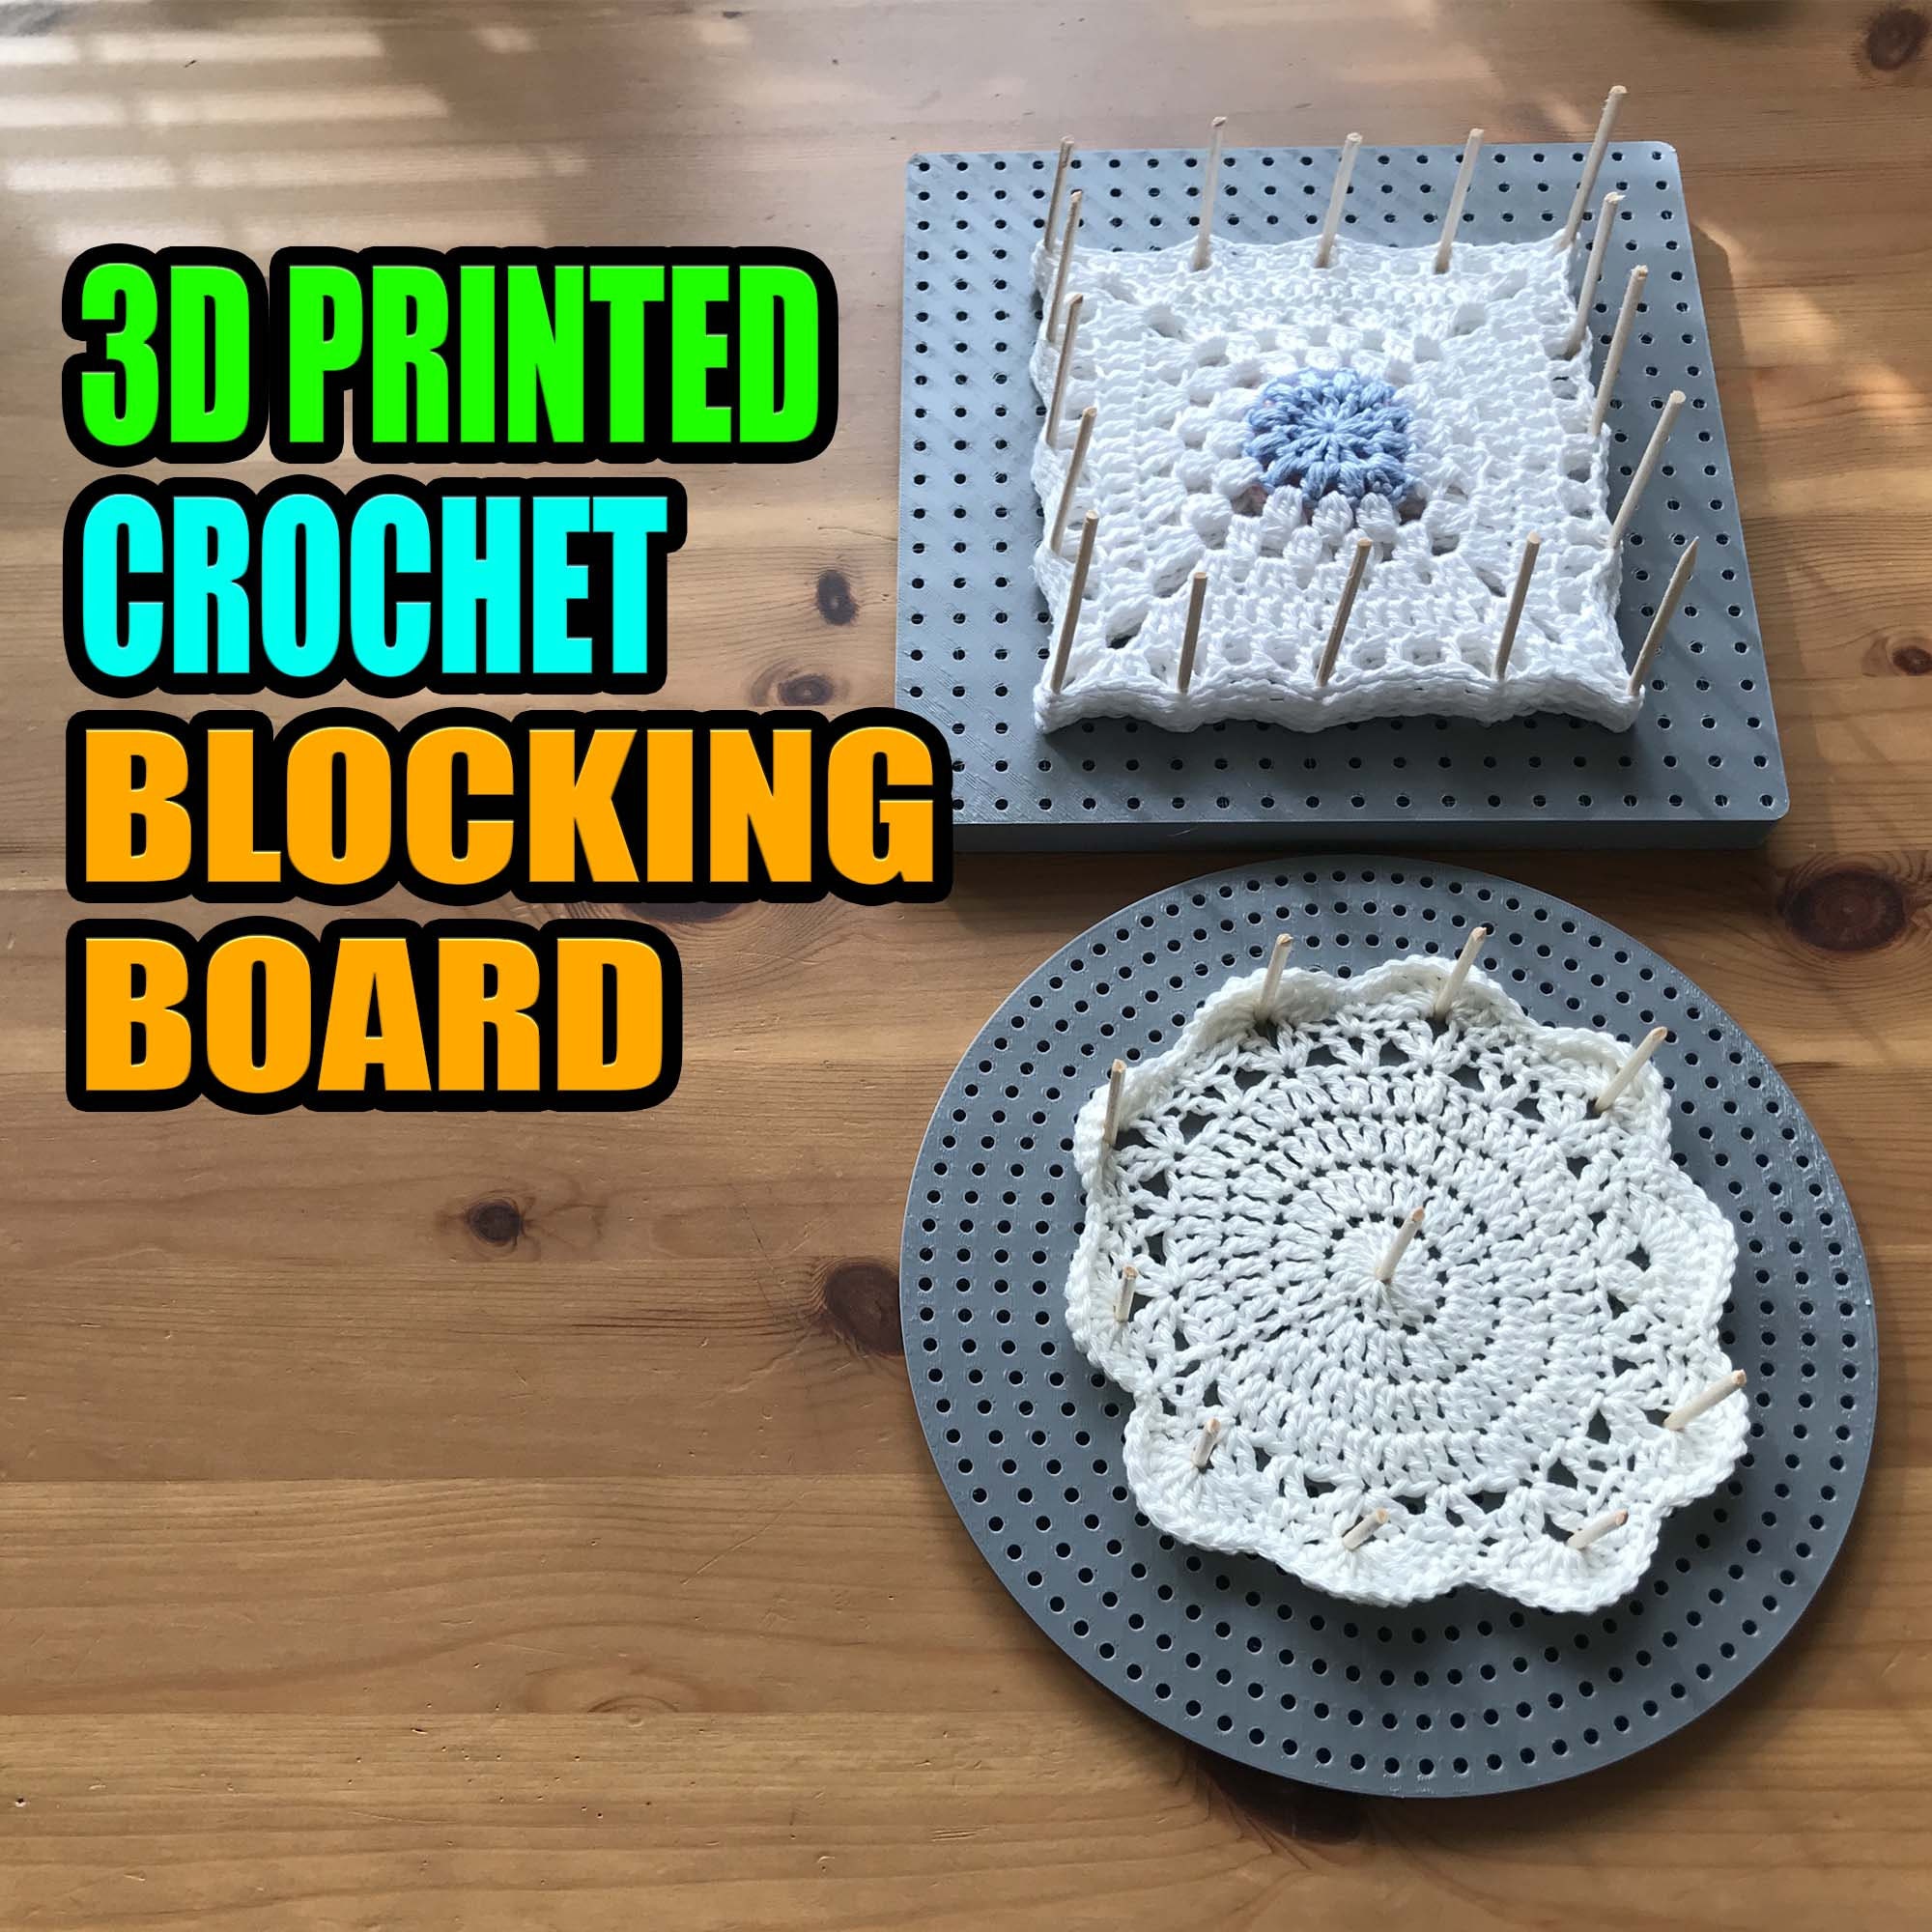 Blocking Board 4 Wooden Dowels Included for Knitting and Crochet Projects  3D Printed 